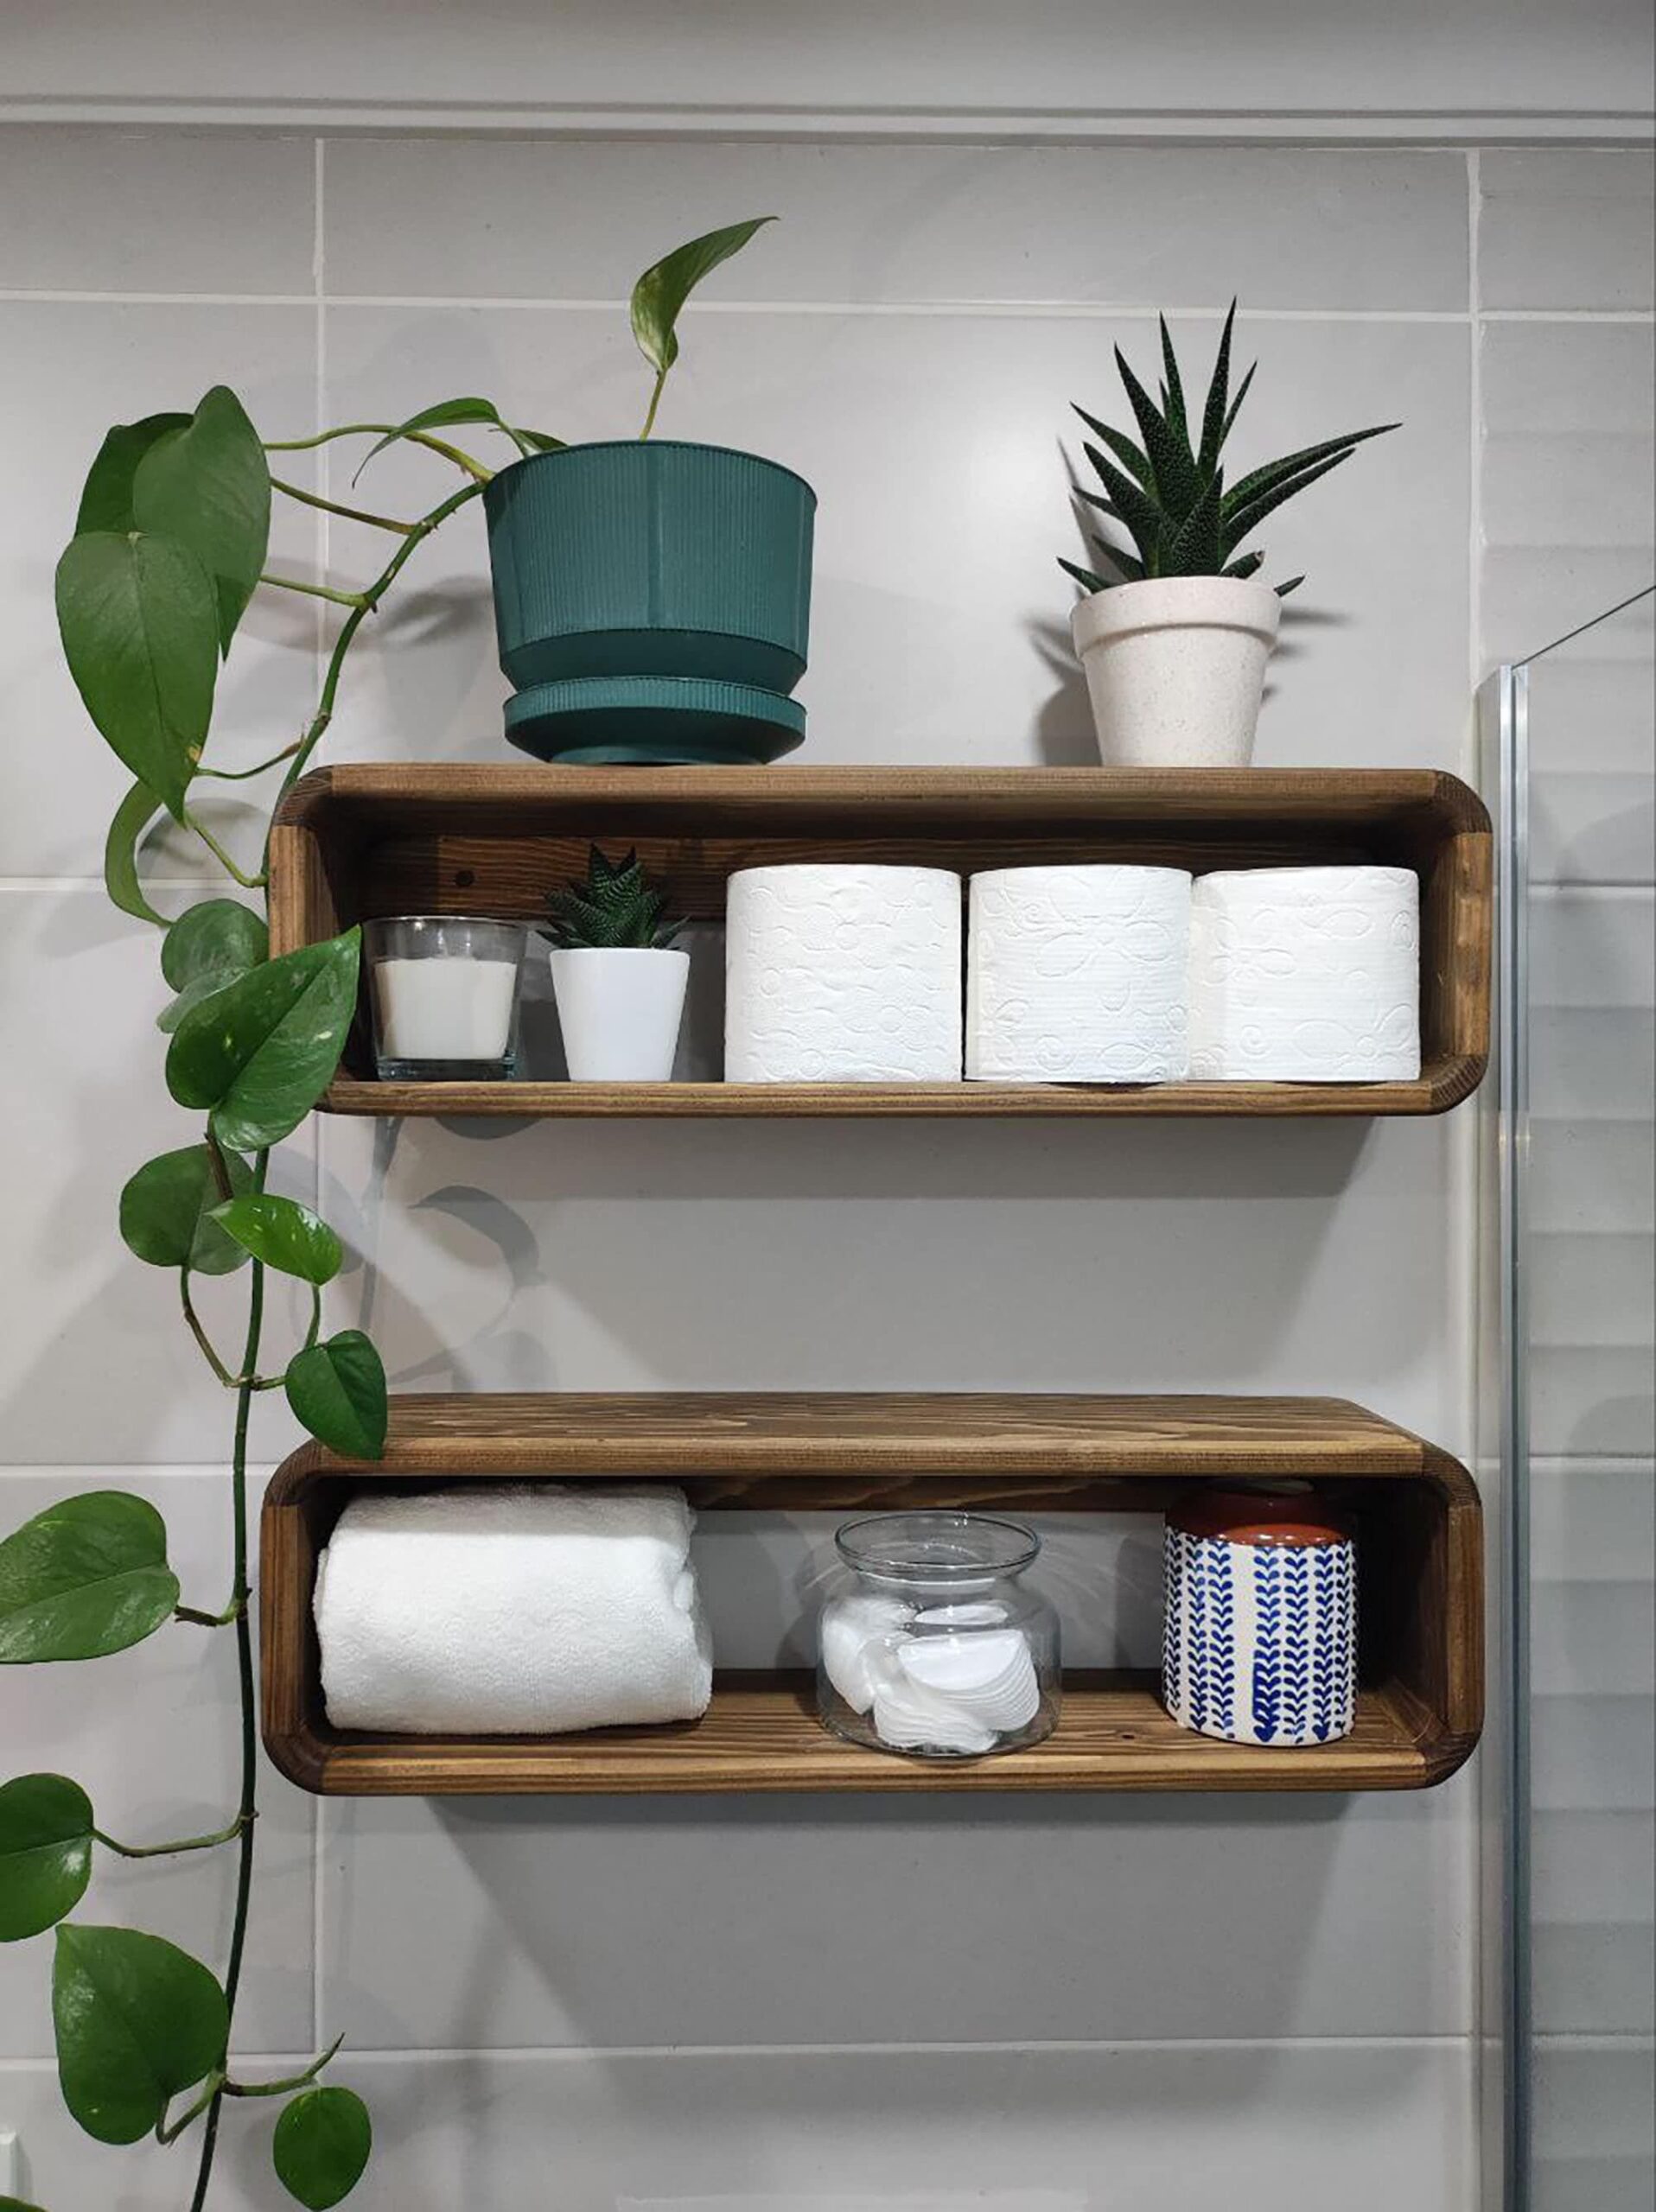 Bathroom Shelves Upgrade Your Bathroom Storage with These Creative Organizing Solutions